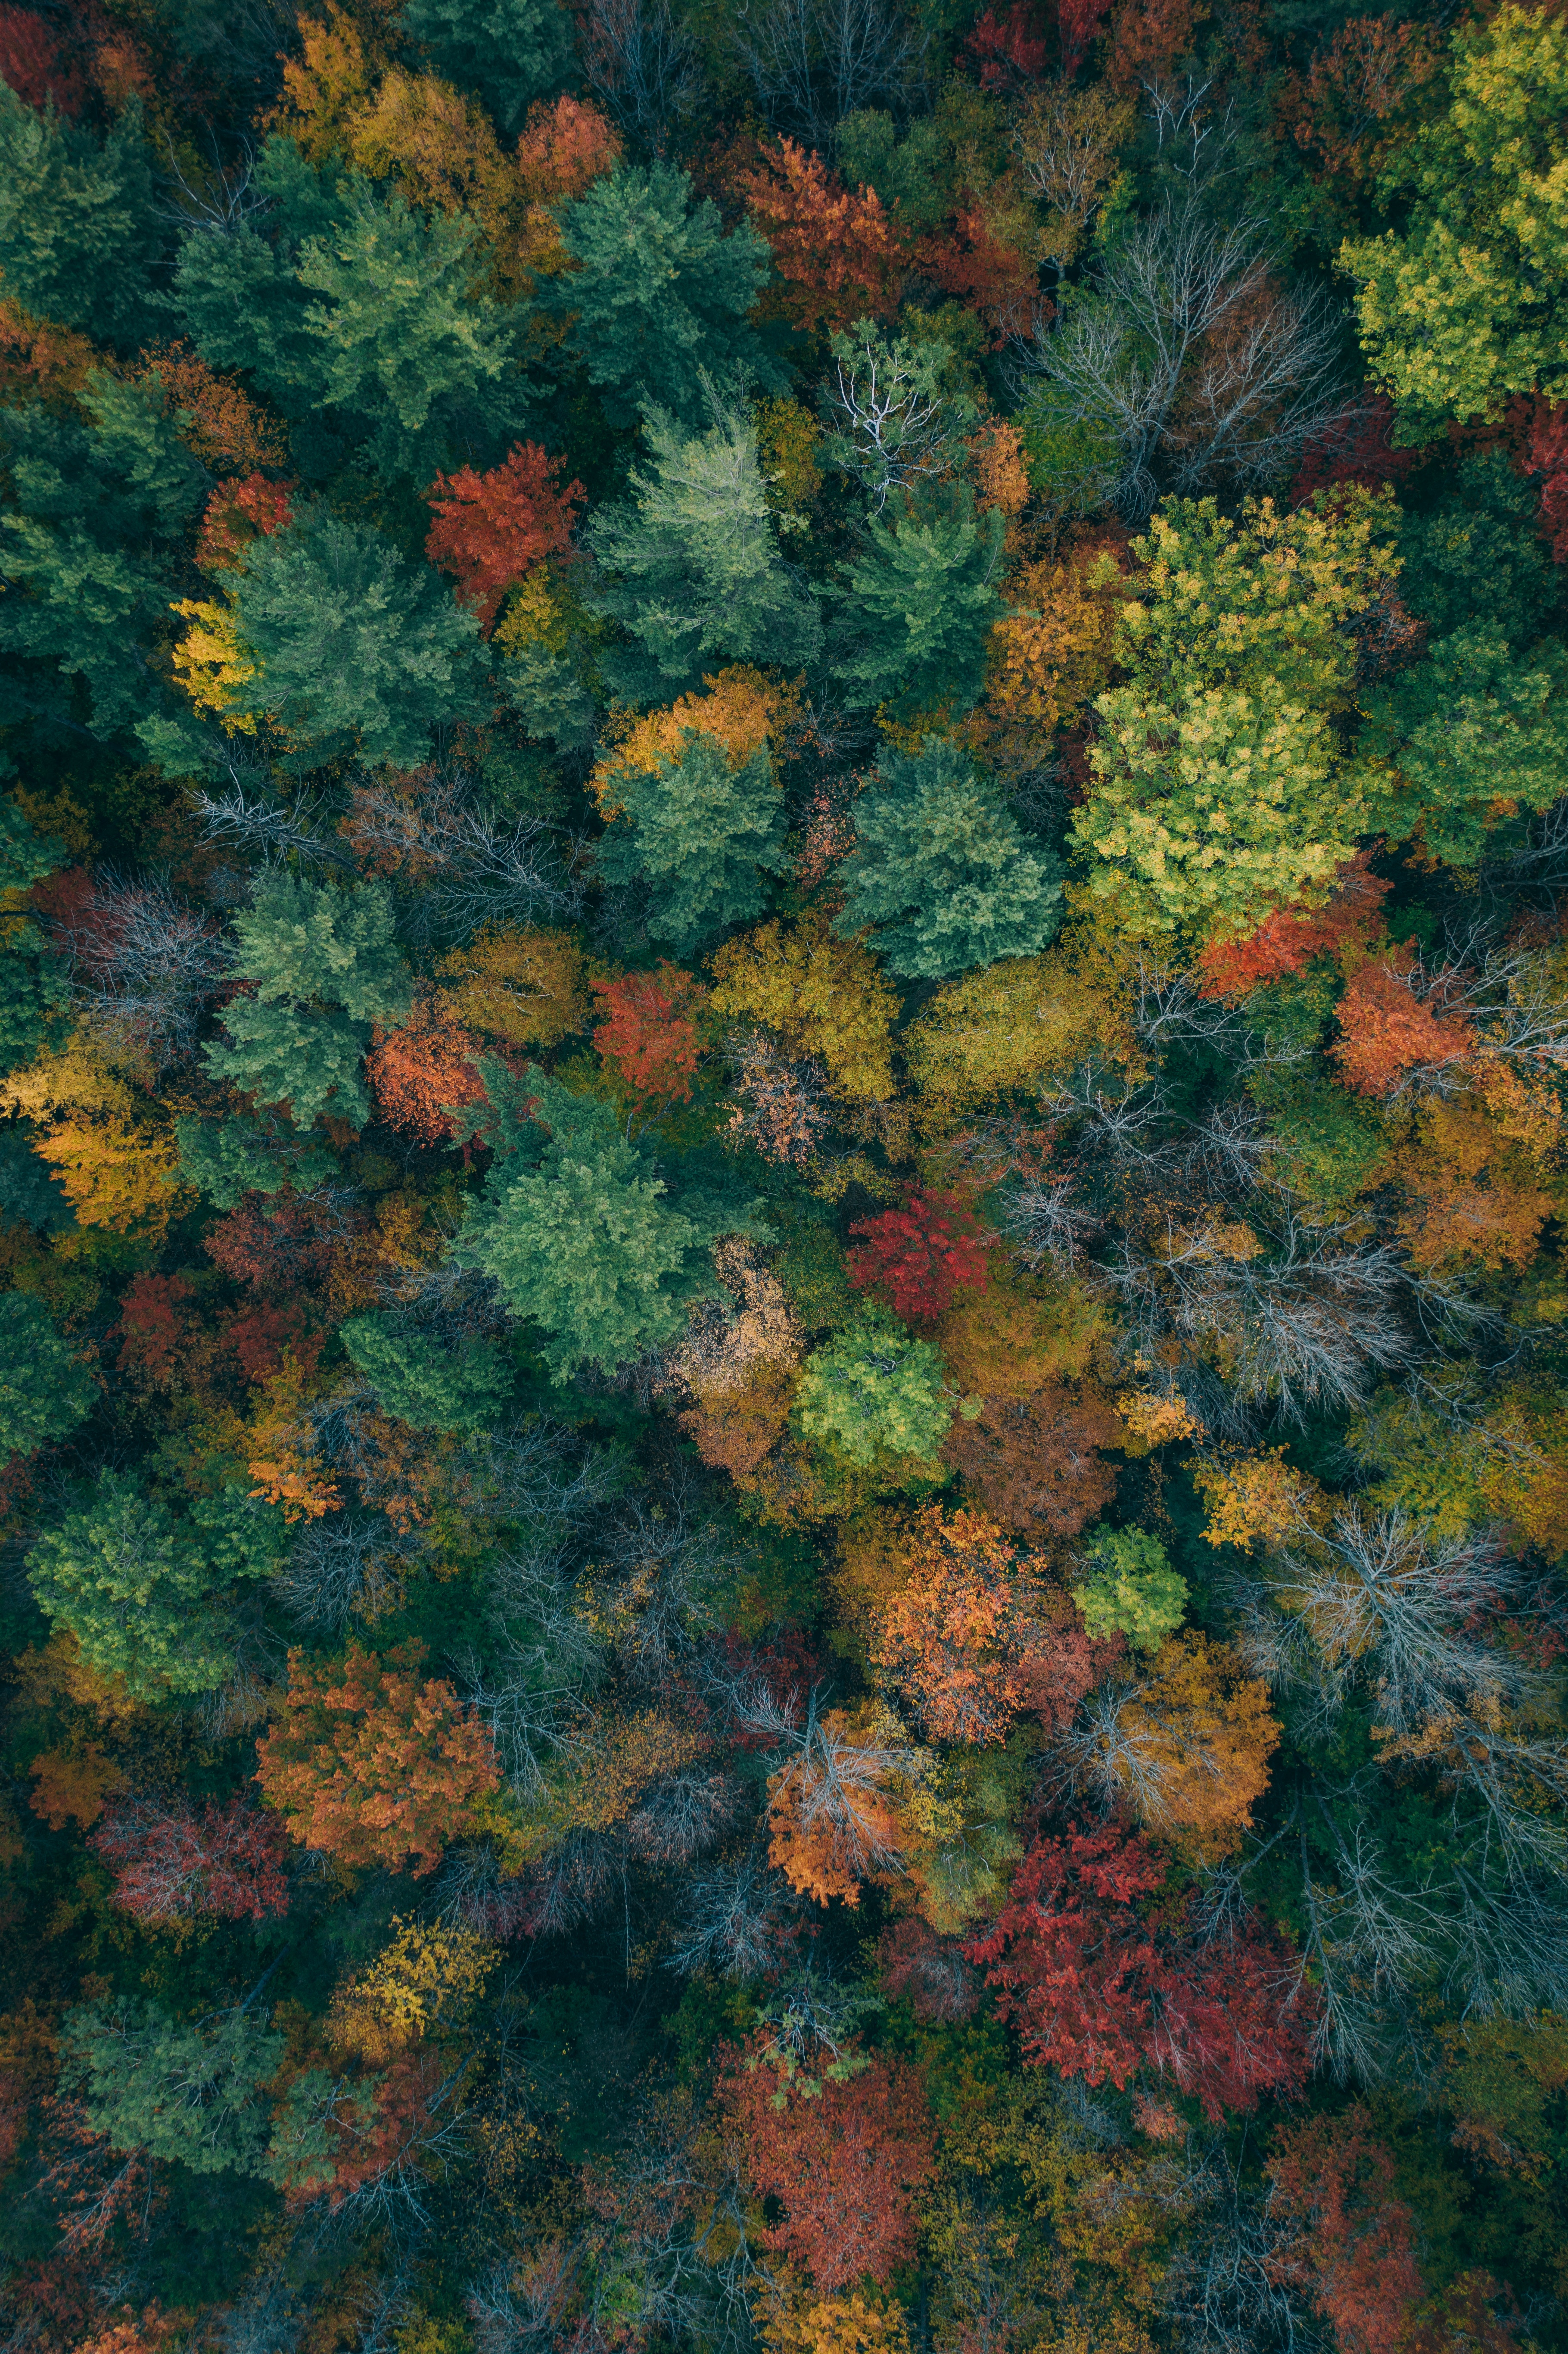 forest, colorful, nature, autumn colors, autumn, autumn paints, trees, view from above, colourful